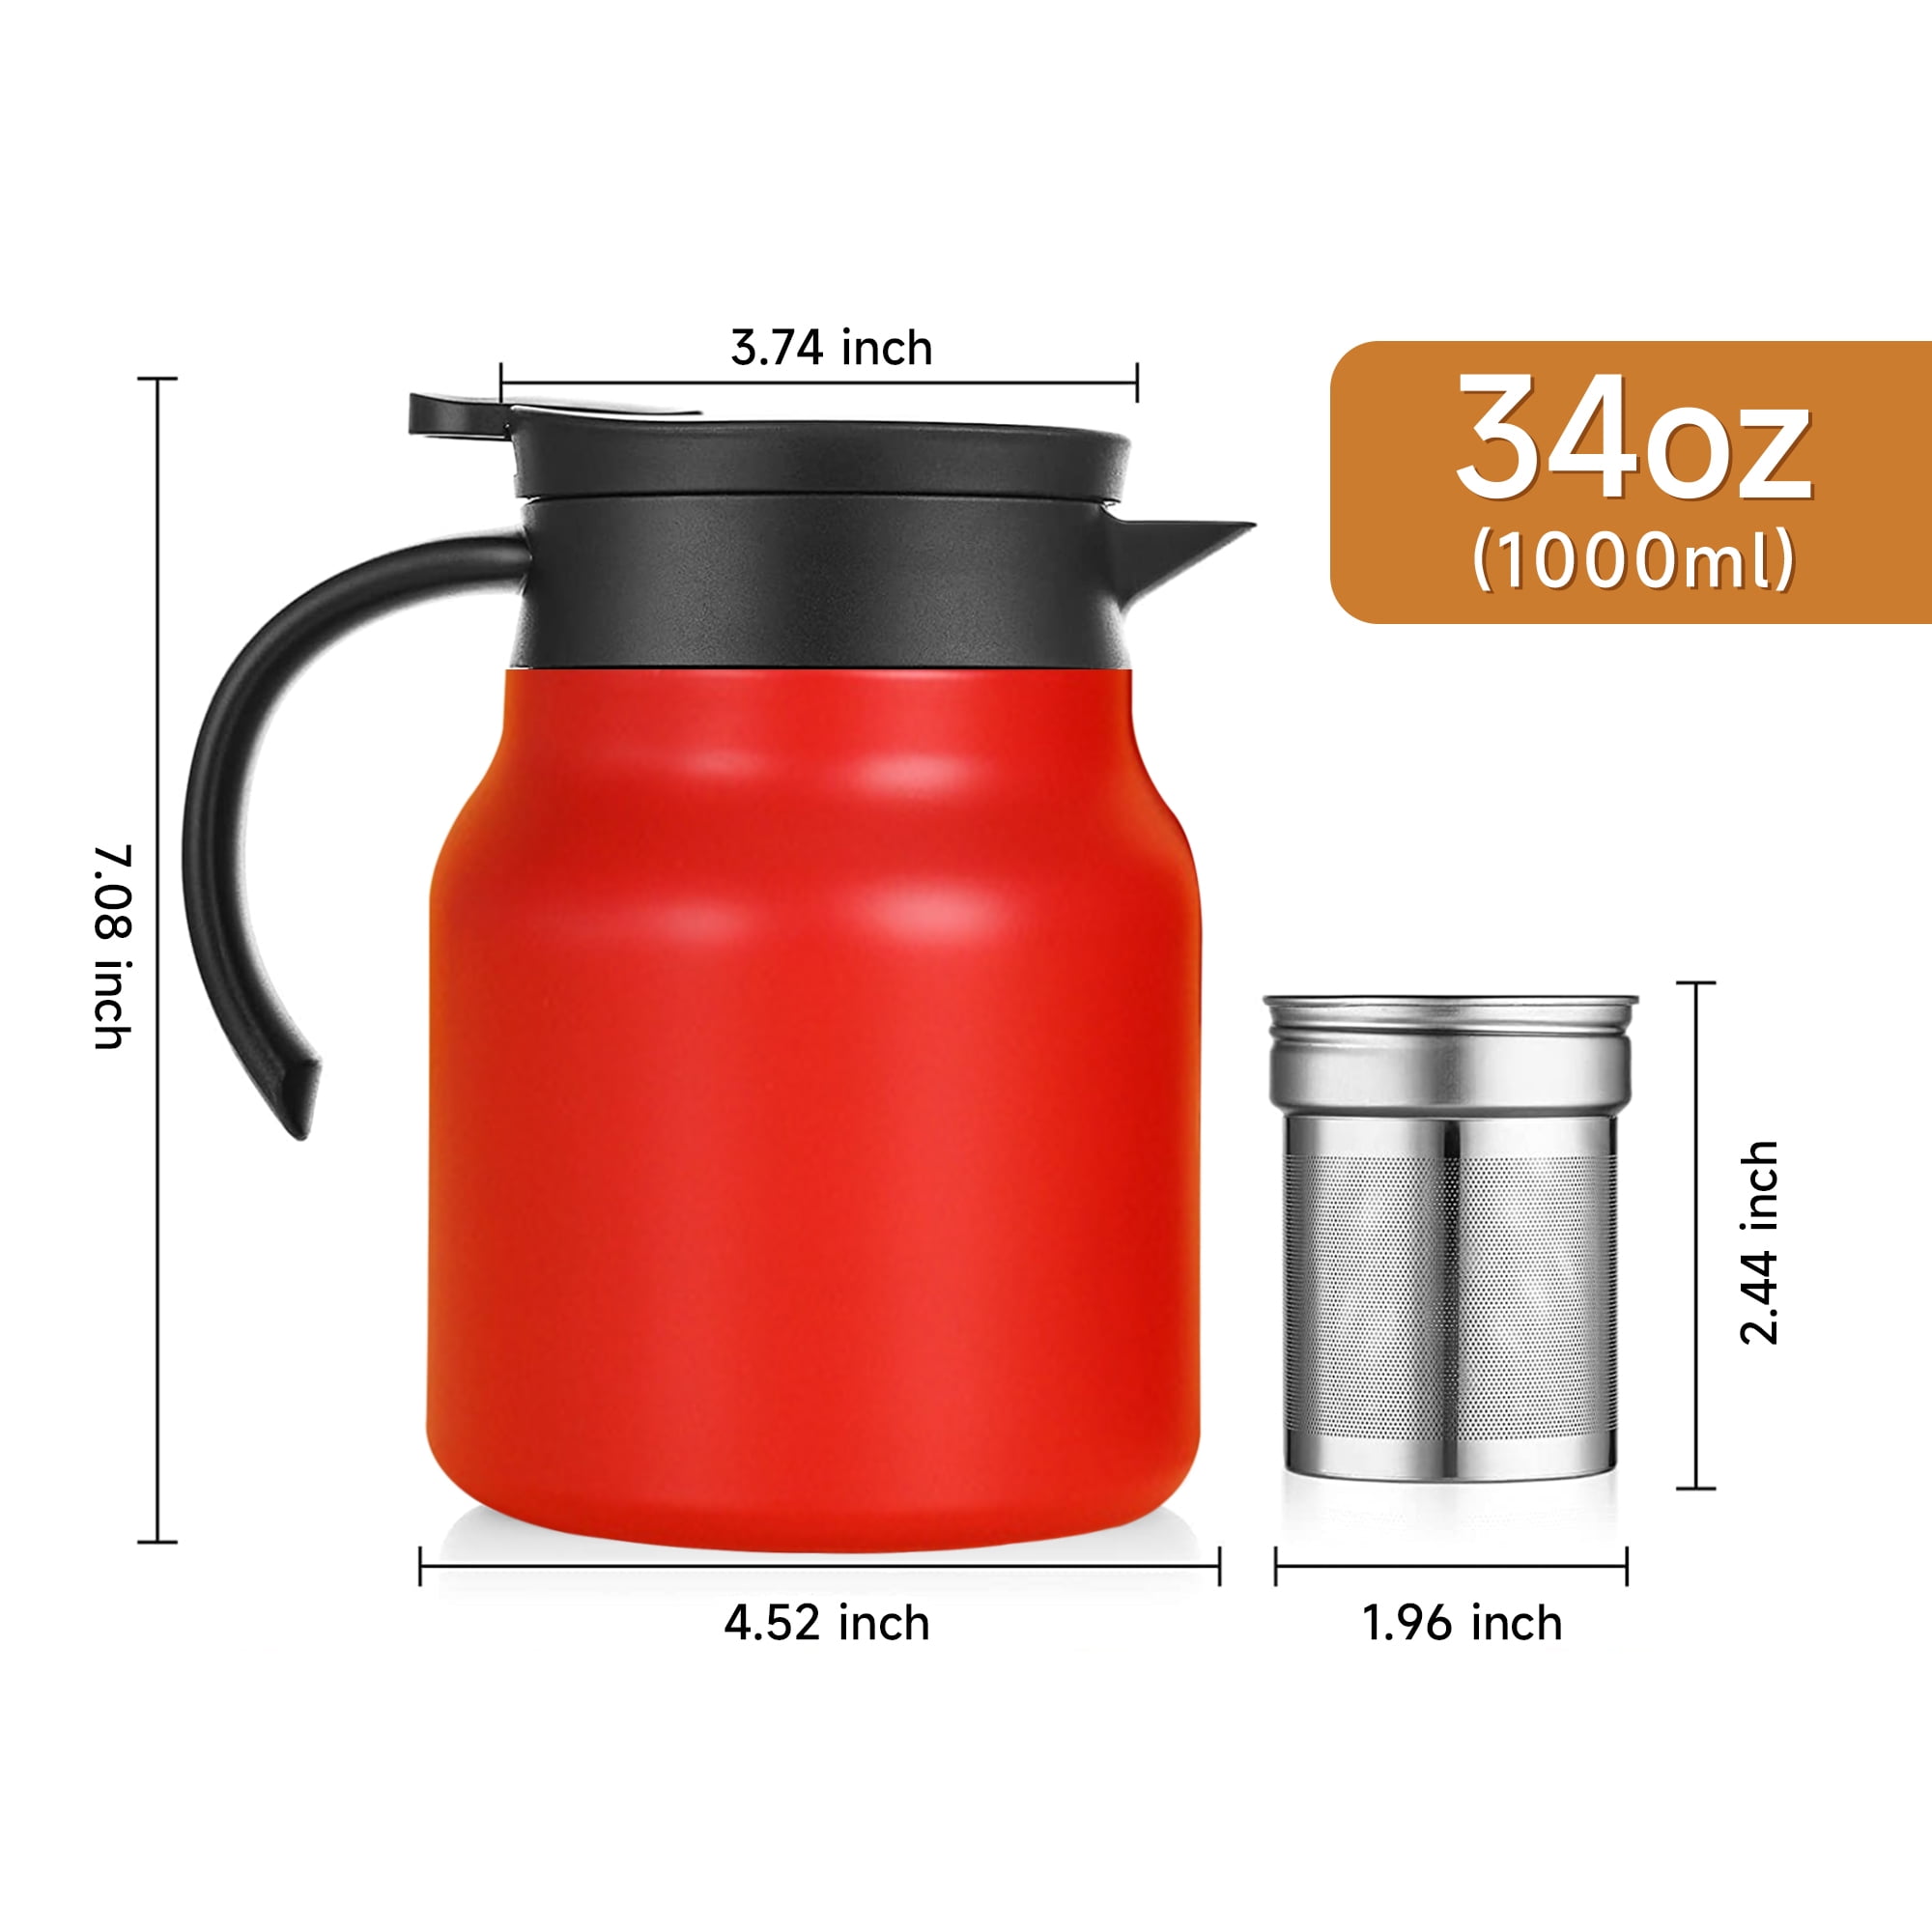 Yastant 1l(34oz) Thermal Coffee Carafe Tea Pot Stainless Steel, Double Wall Vacuum Insulated, Coffee Thermos for Coffee Milk Tea, Size: 19, Black